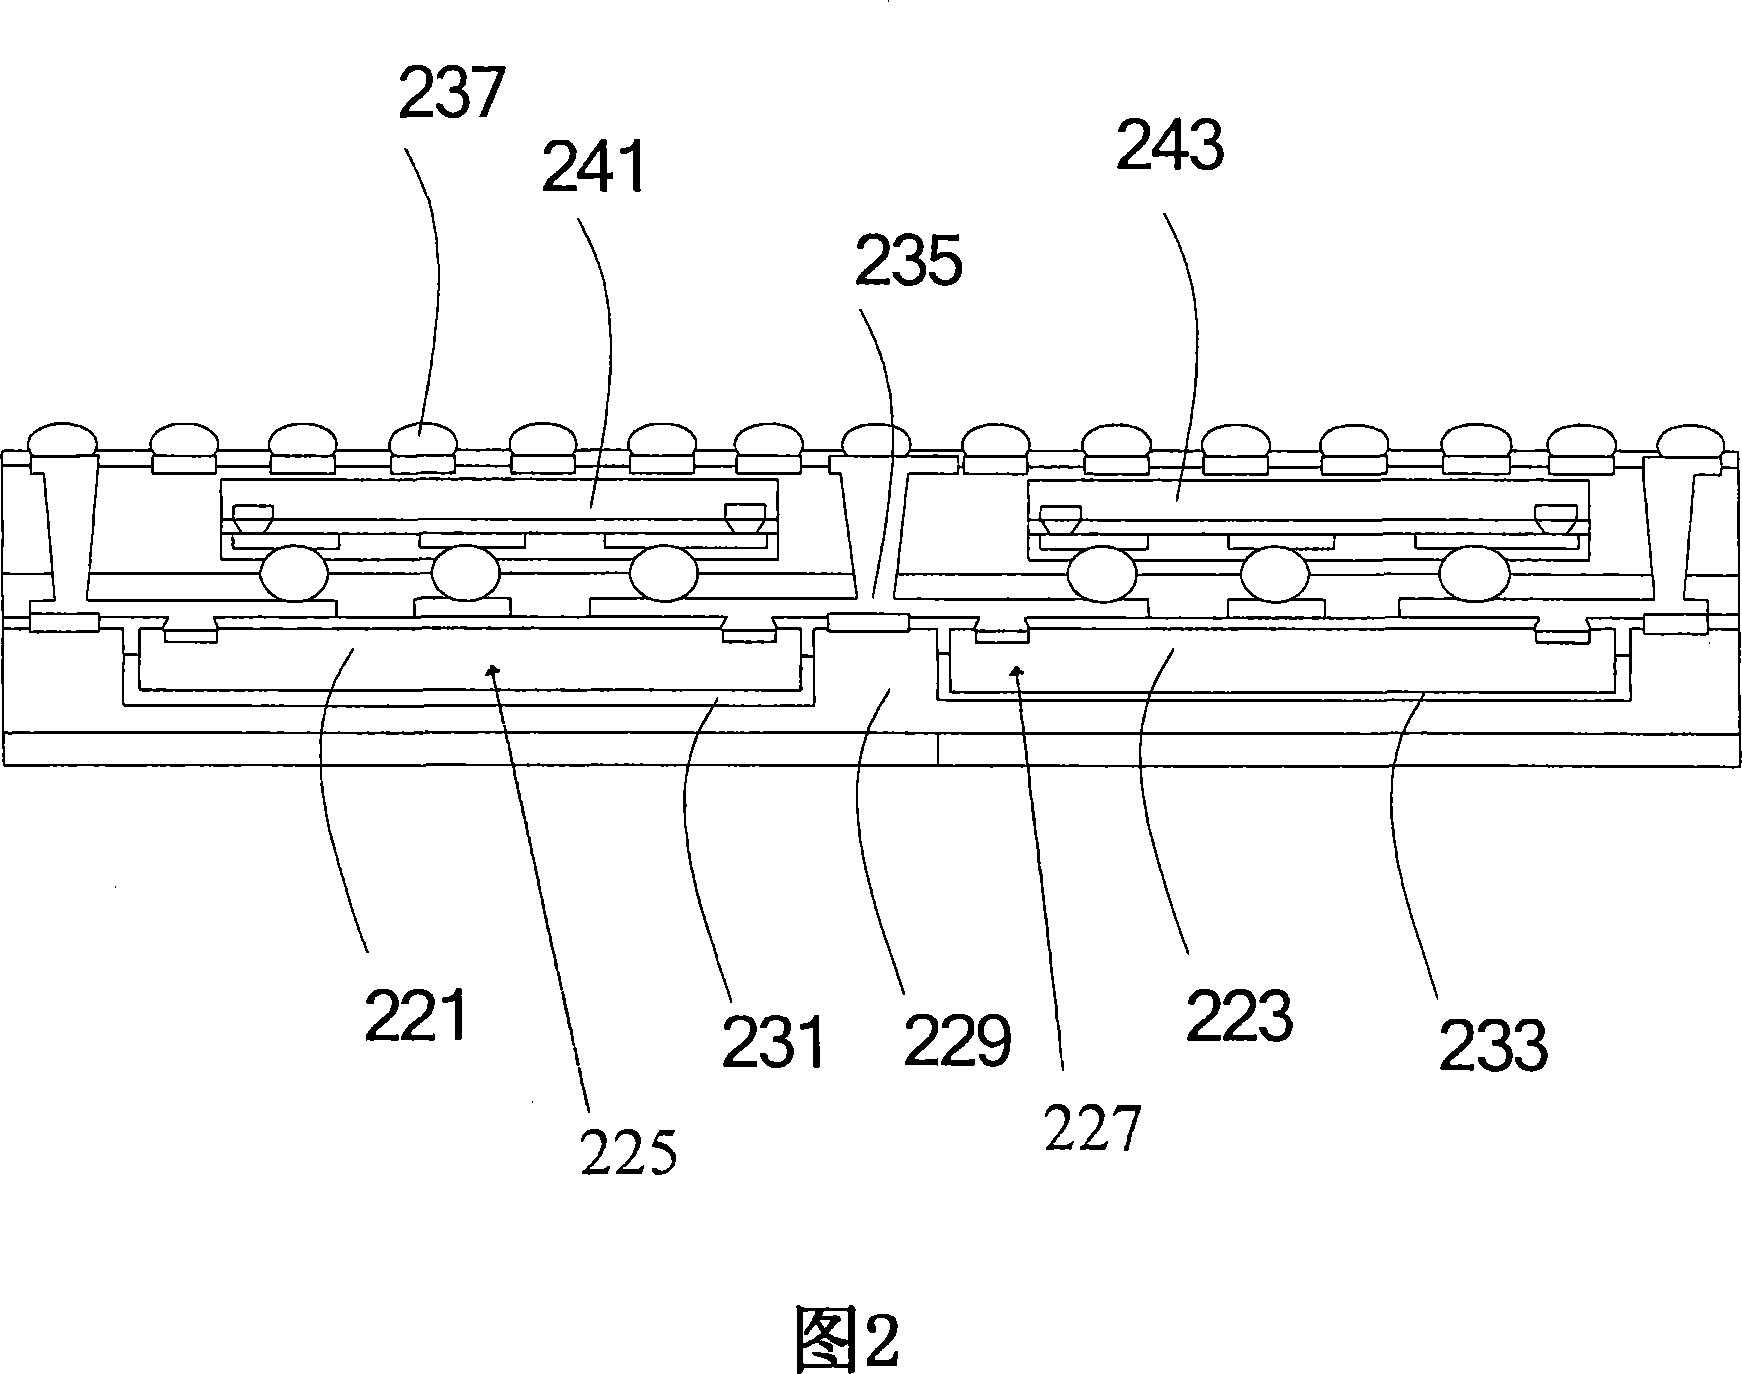 Multi-chips package with reduced structure and method for forming the same